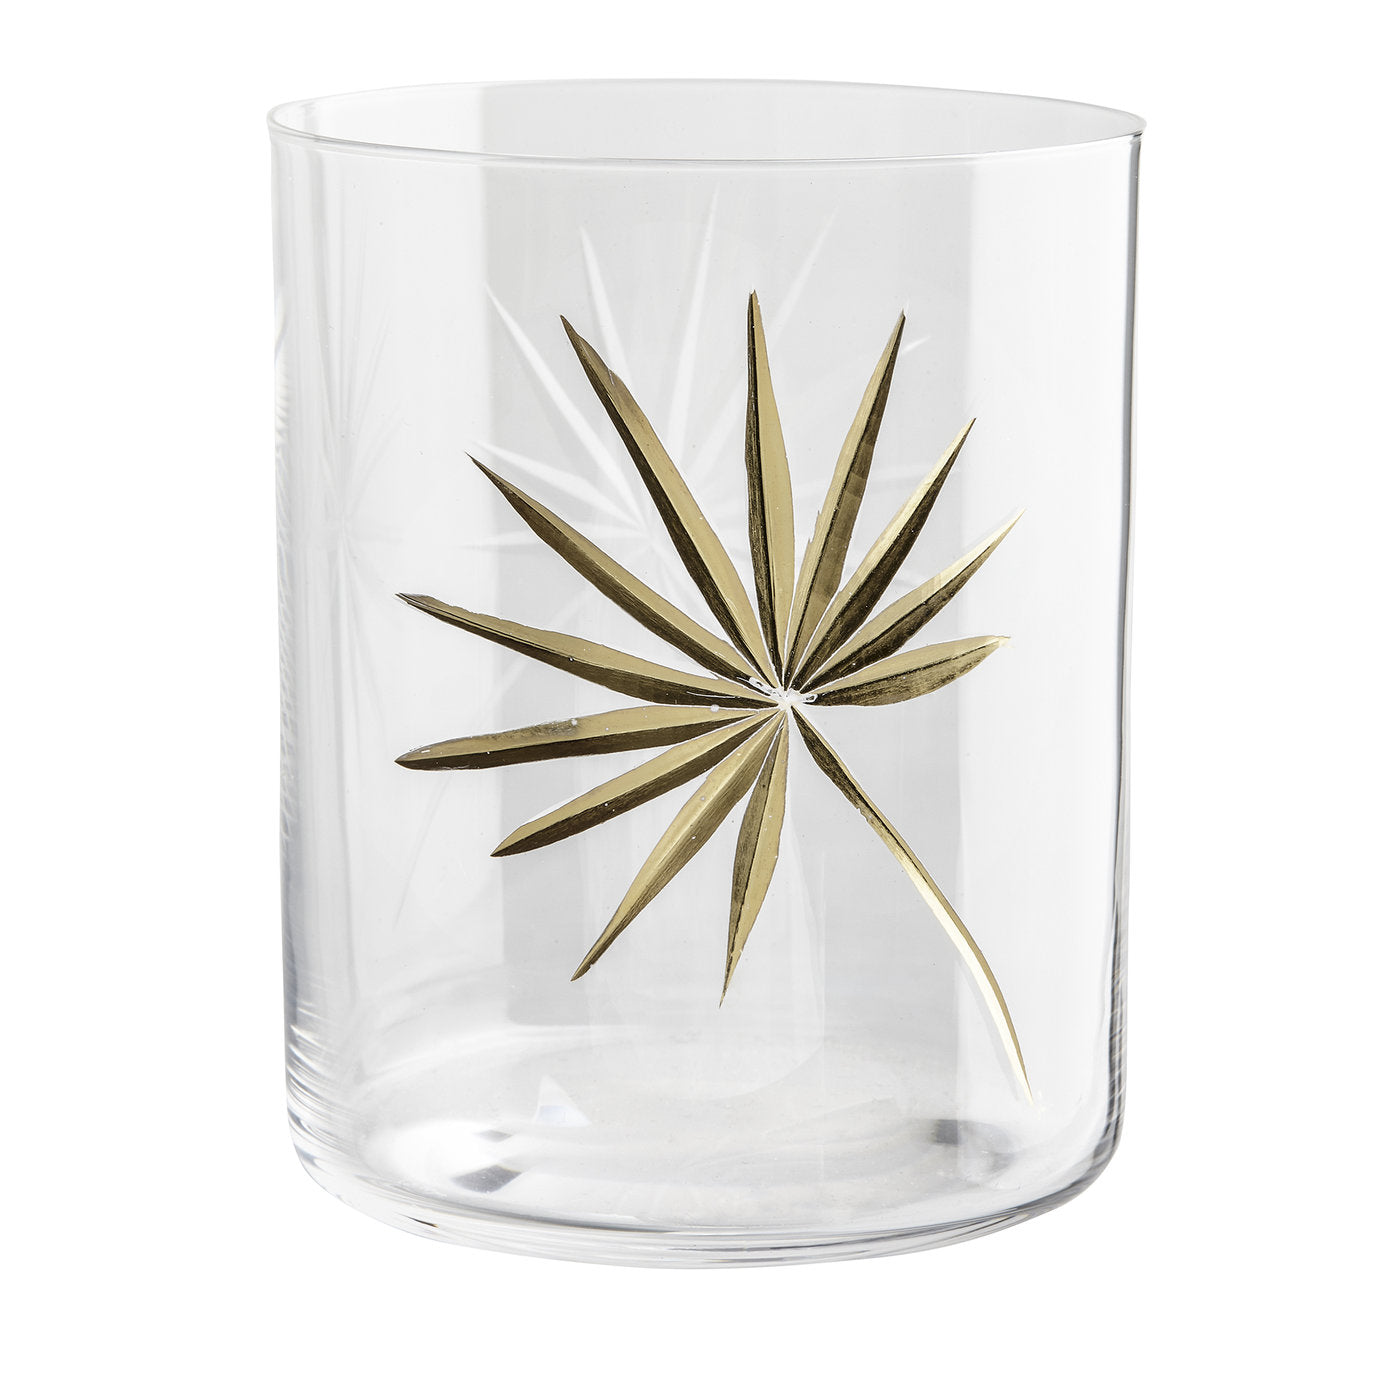 Set of 2 Double Palm Glasses - Alternative view 1